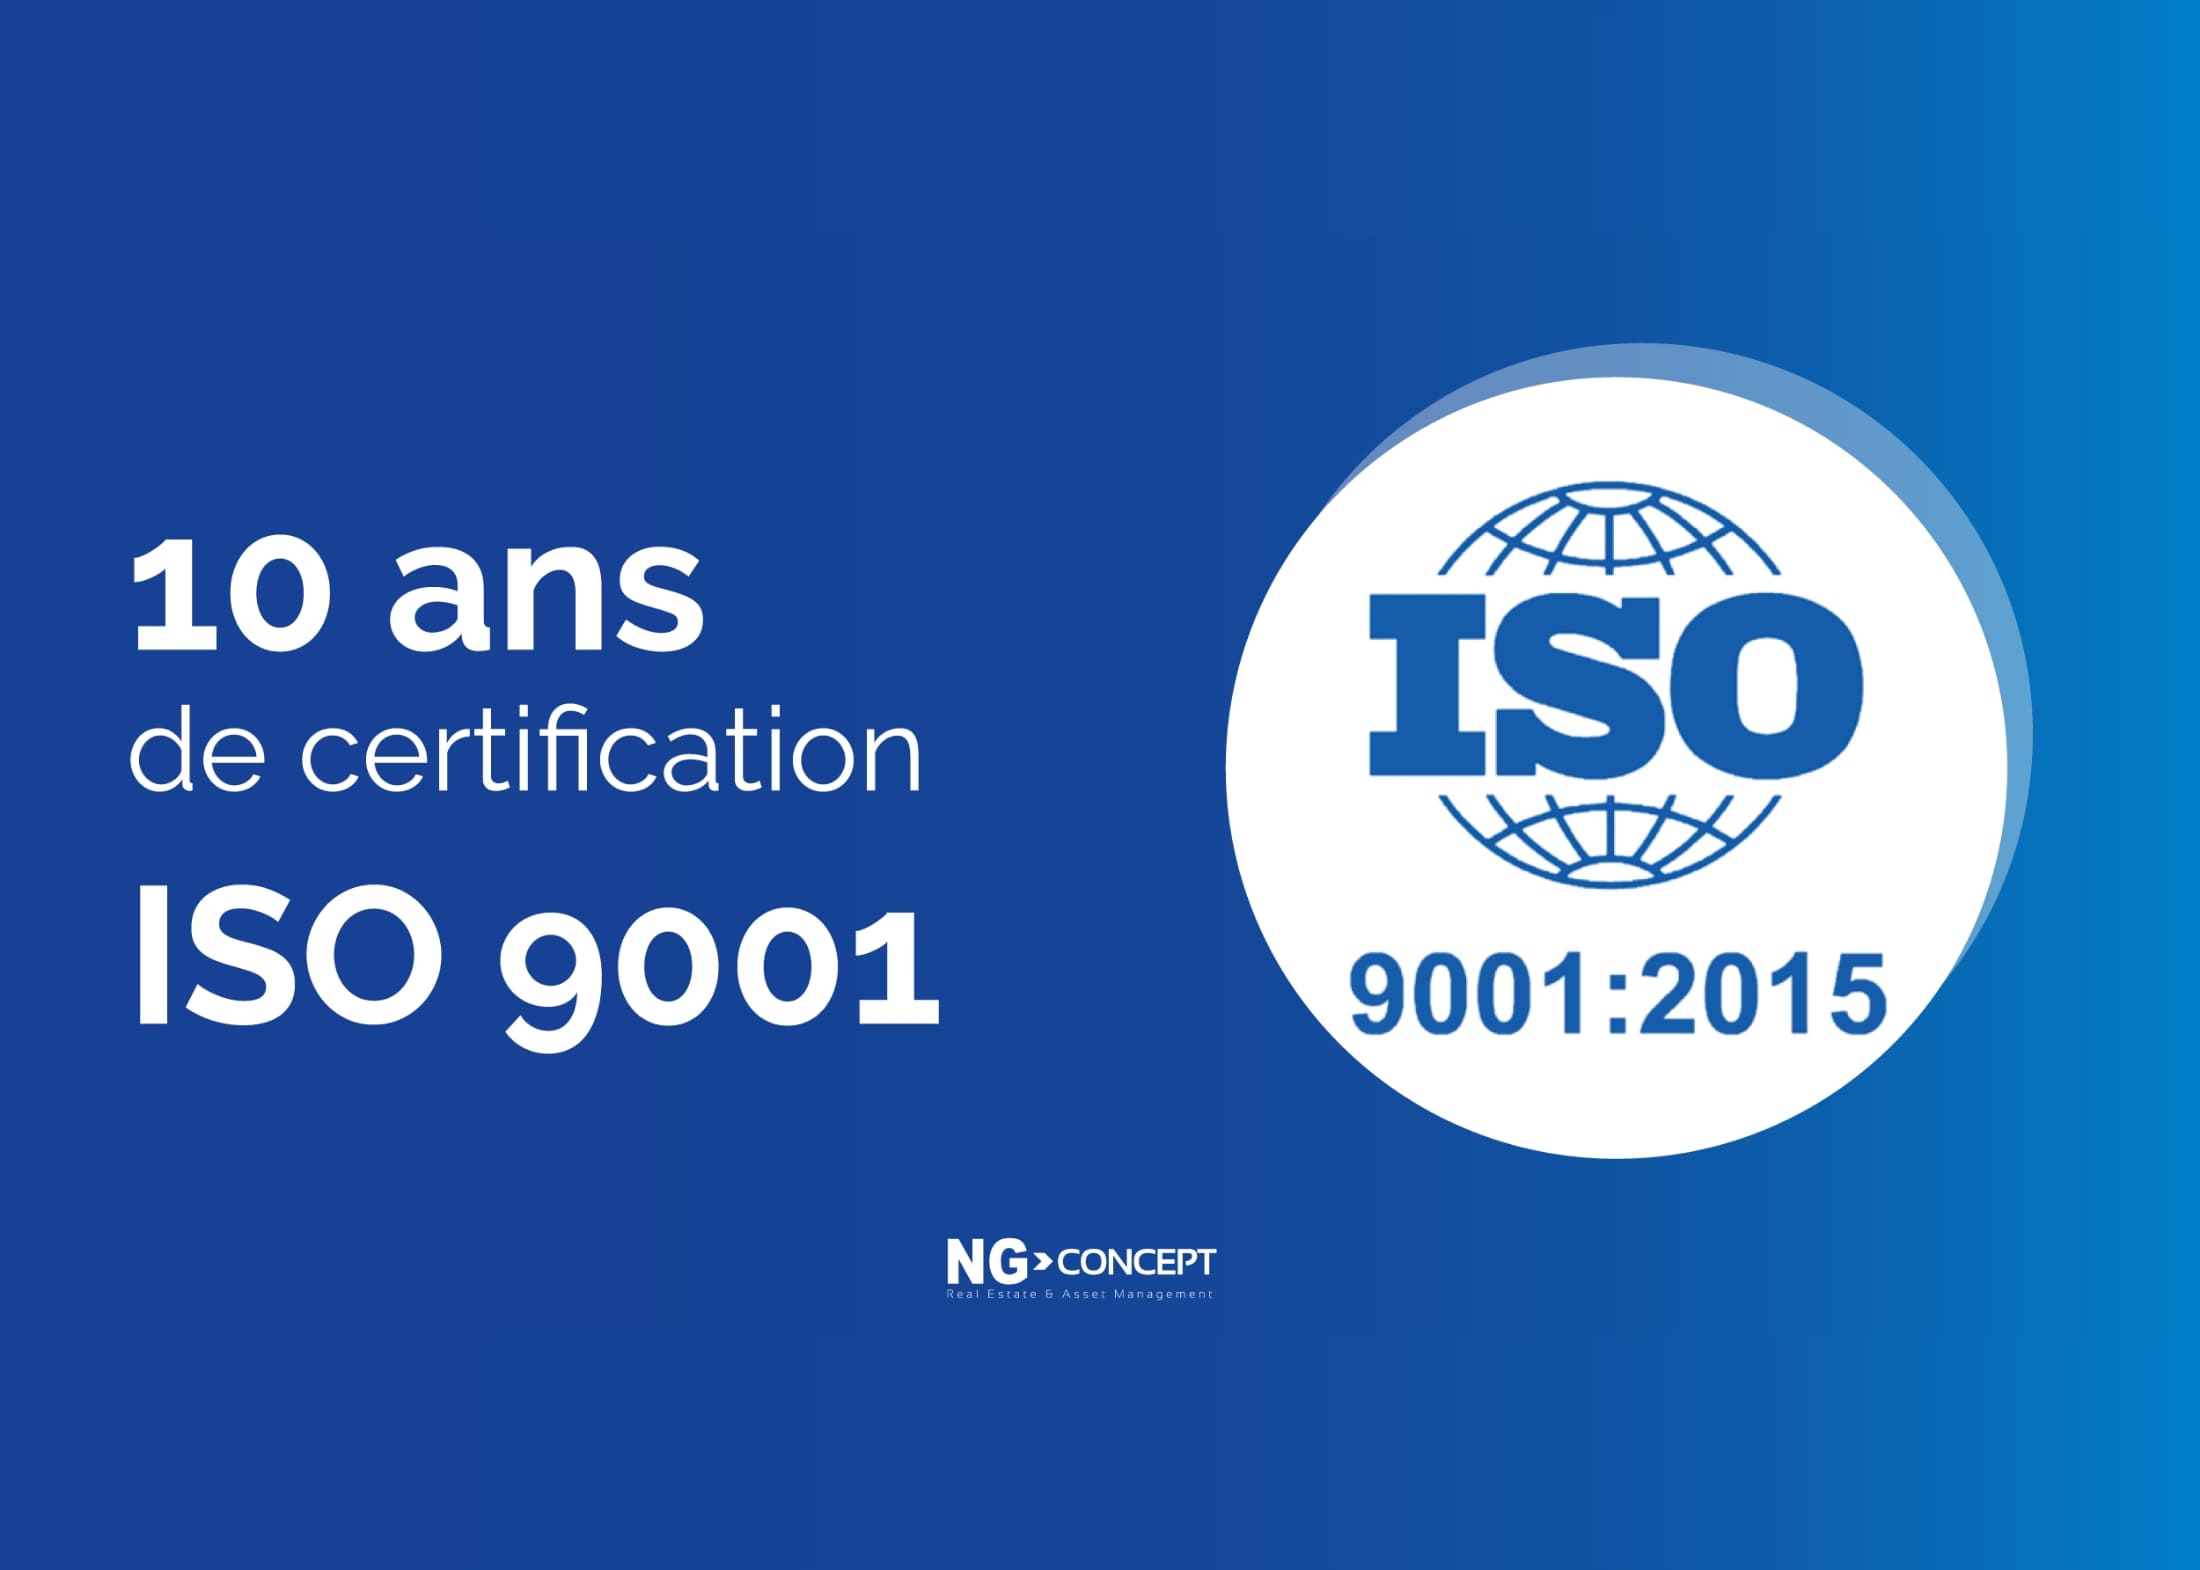 10 years of ISO 9001 certification